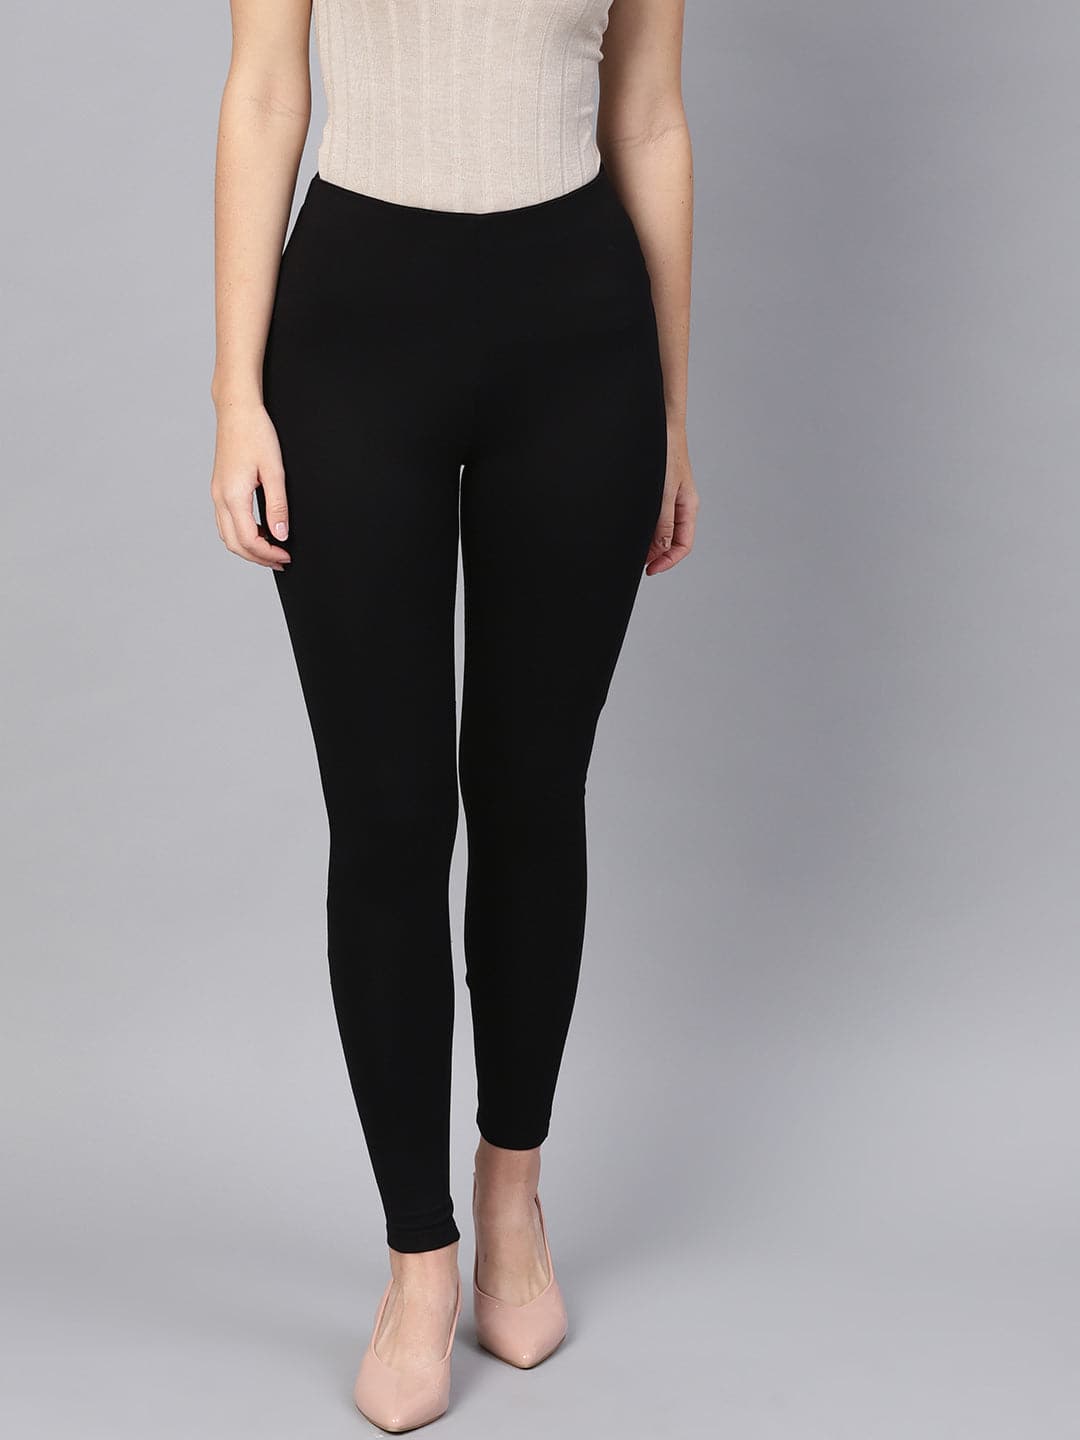 Only black treggings  Treggings, Clothes design, Outfits